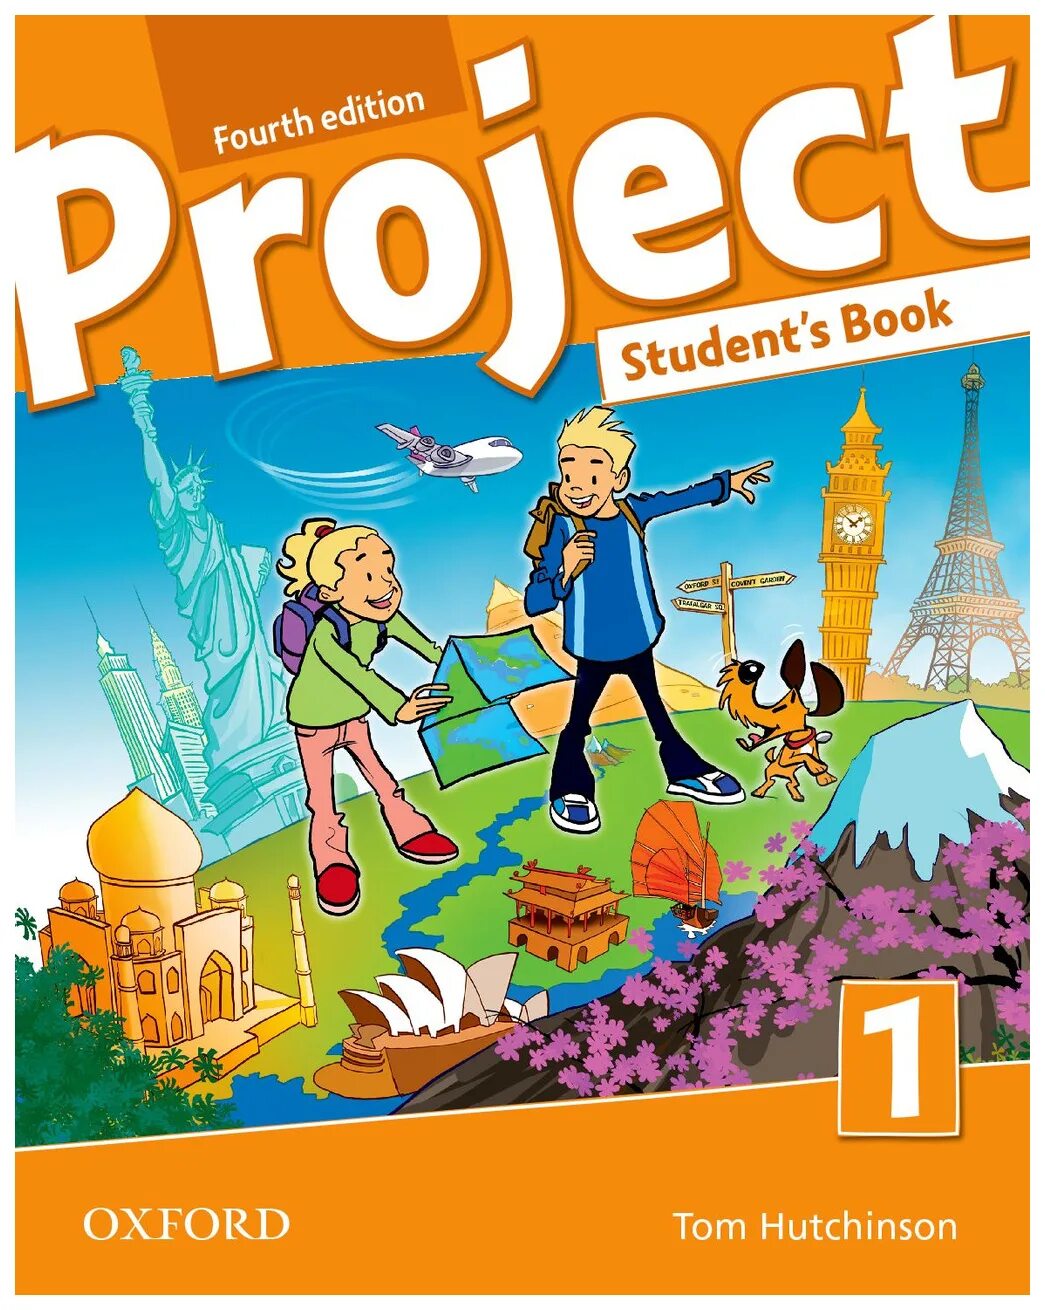 Pupils book 4 1. Project 1 fourth Edition students book. Project 1 4th Edition. Project student book4 fourth Edition Workbook book. Рабочая тетрадь Project 1 Oxford Tom Hutchinson.